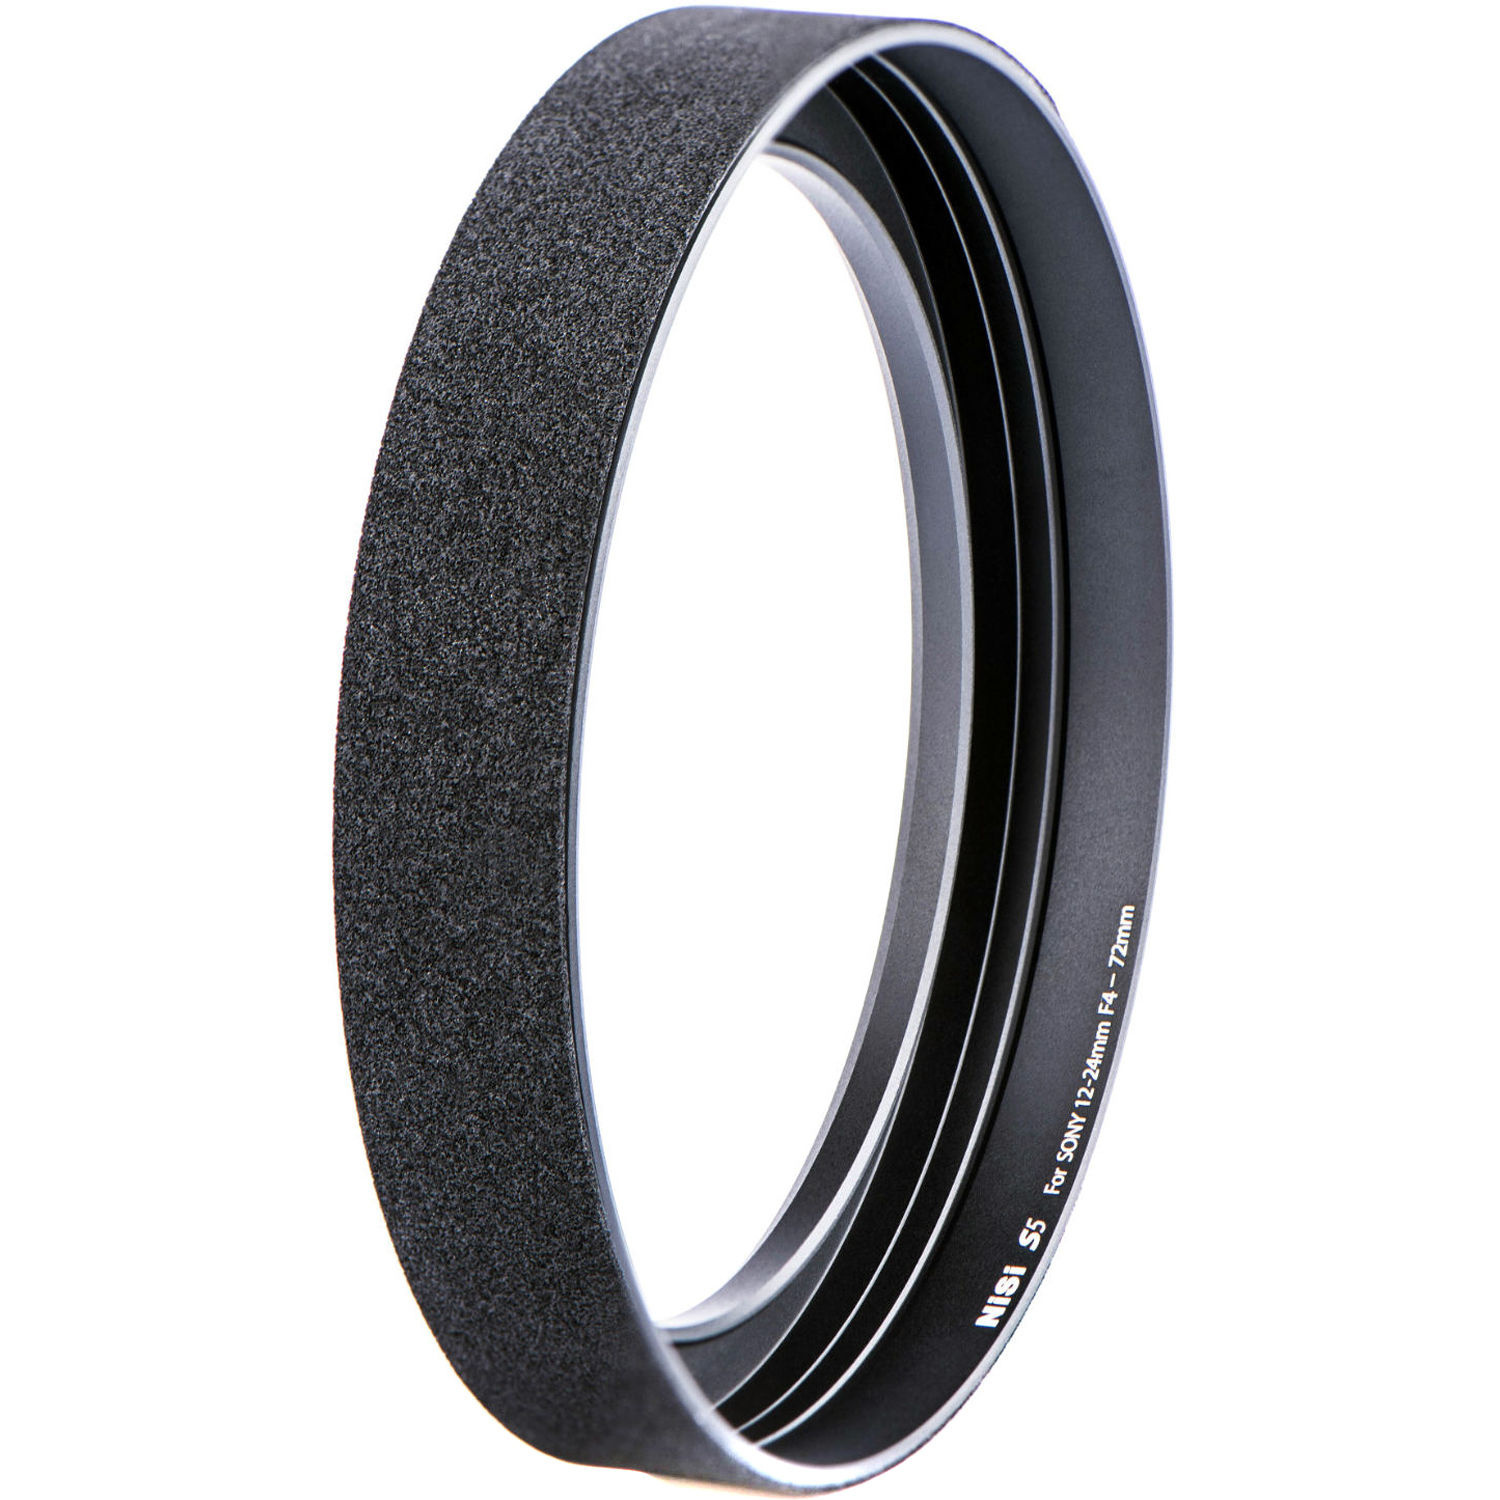 NiSi 72mm Filter Adapter Ring for S5 (Sony 12-24mm)